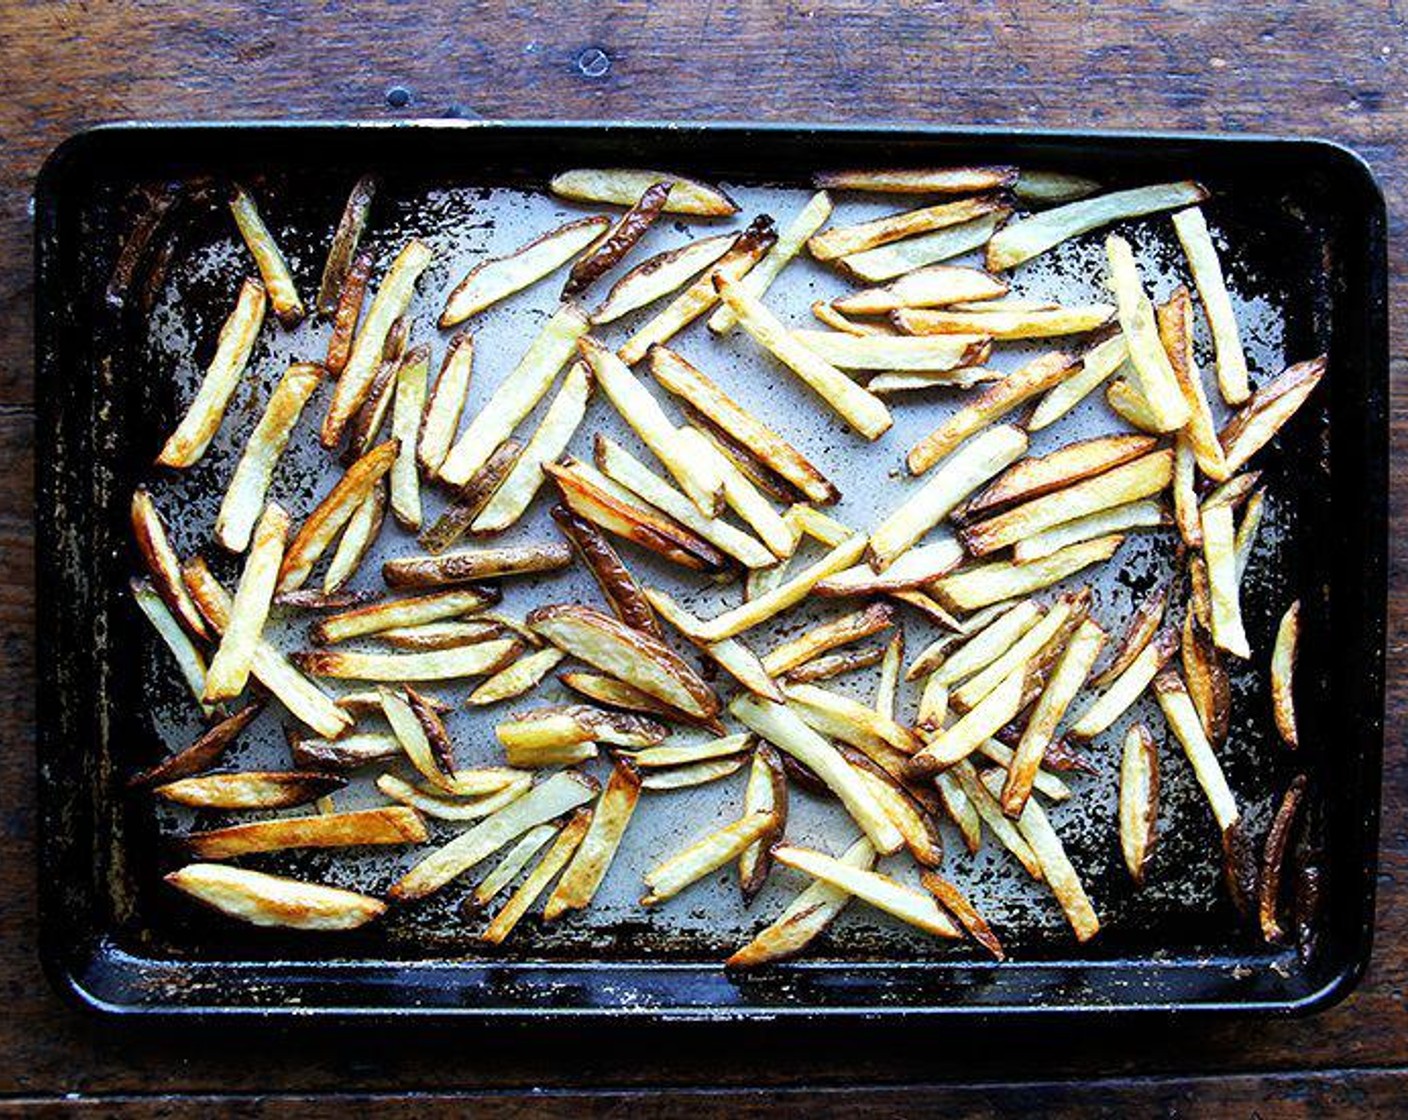 step 9 Continue to bake until the fries are golden and crisp, about 5 to 10 minutes longer. Rotate the pan as necessary to help them brown evenly.